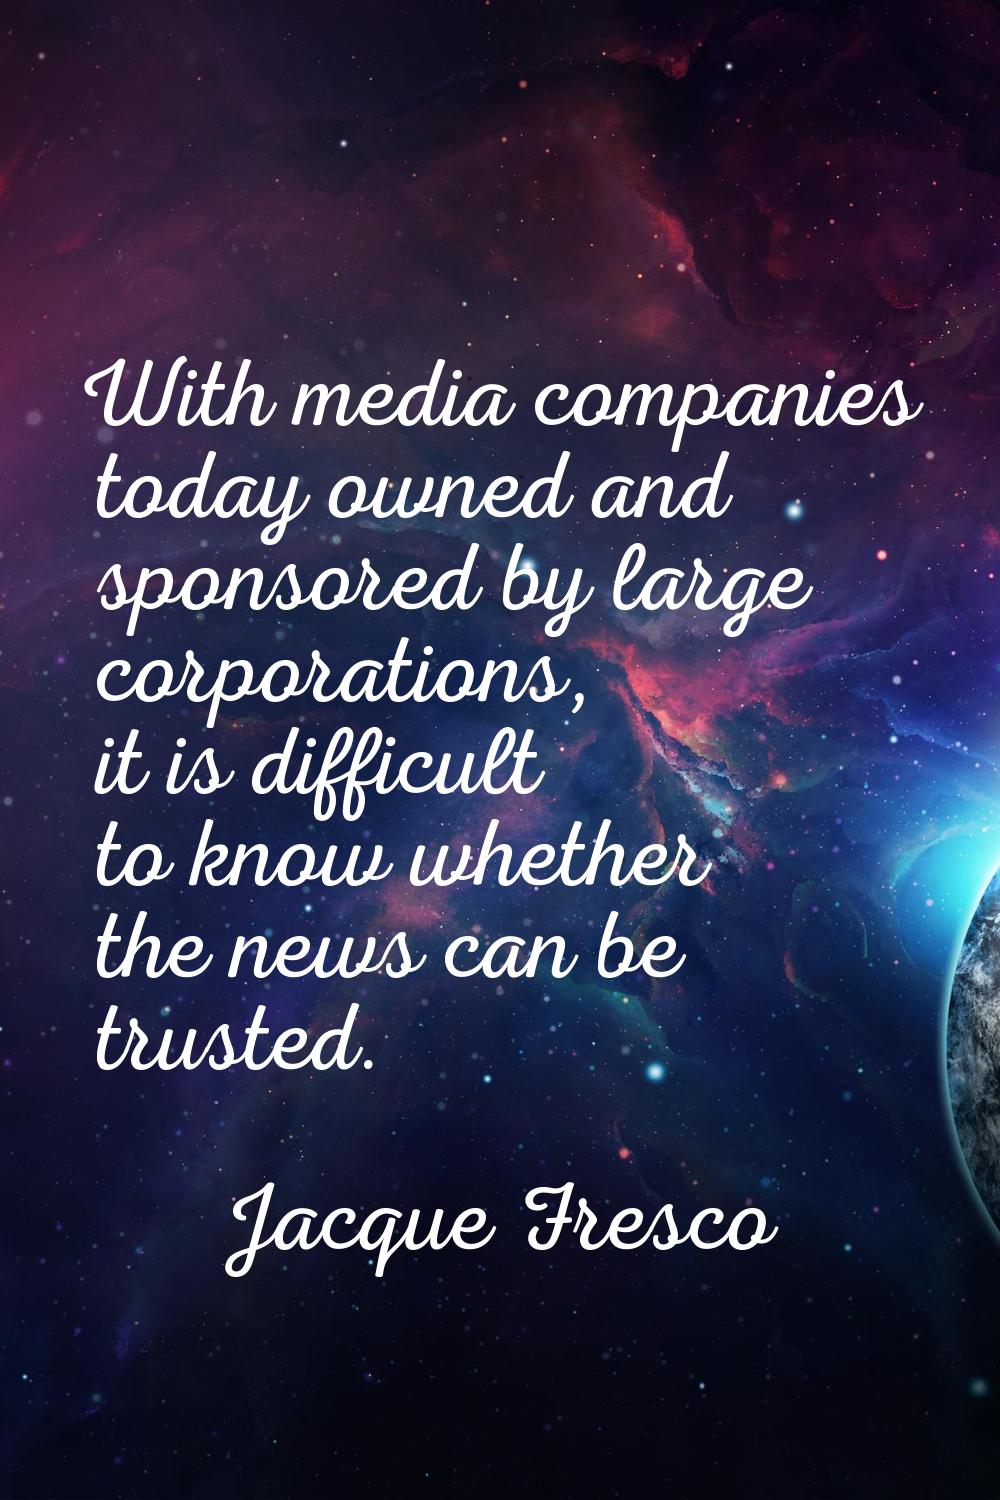 With media companies today owned and sponsored by large corporations, it is difficult to know wheth